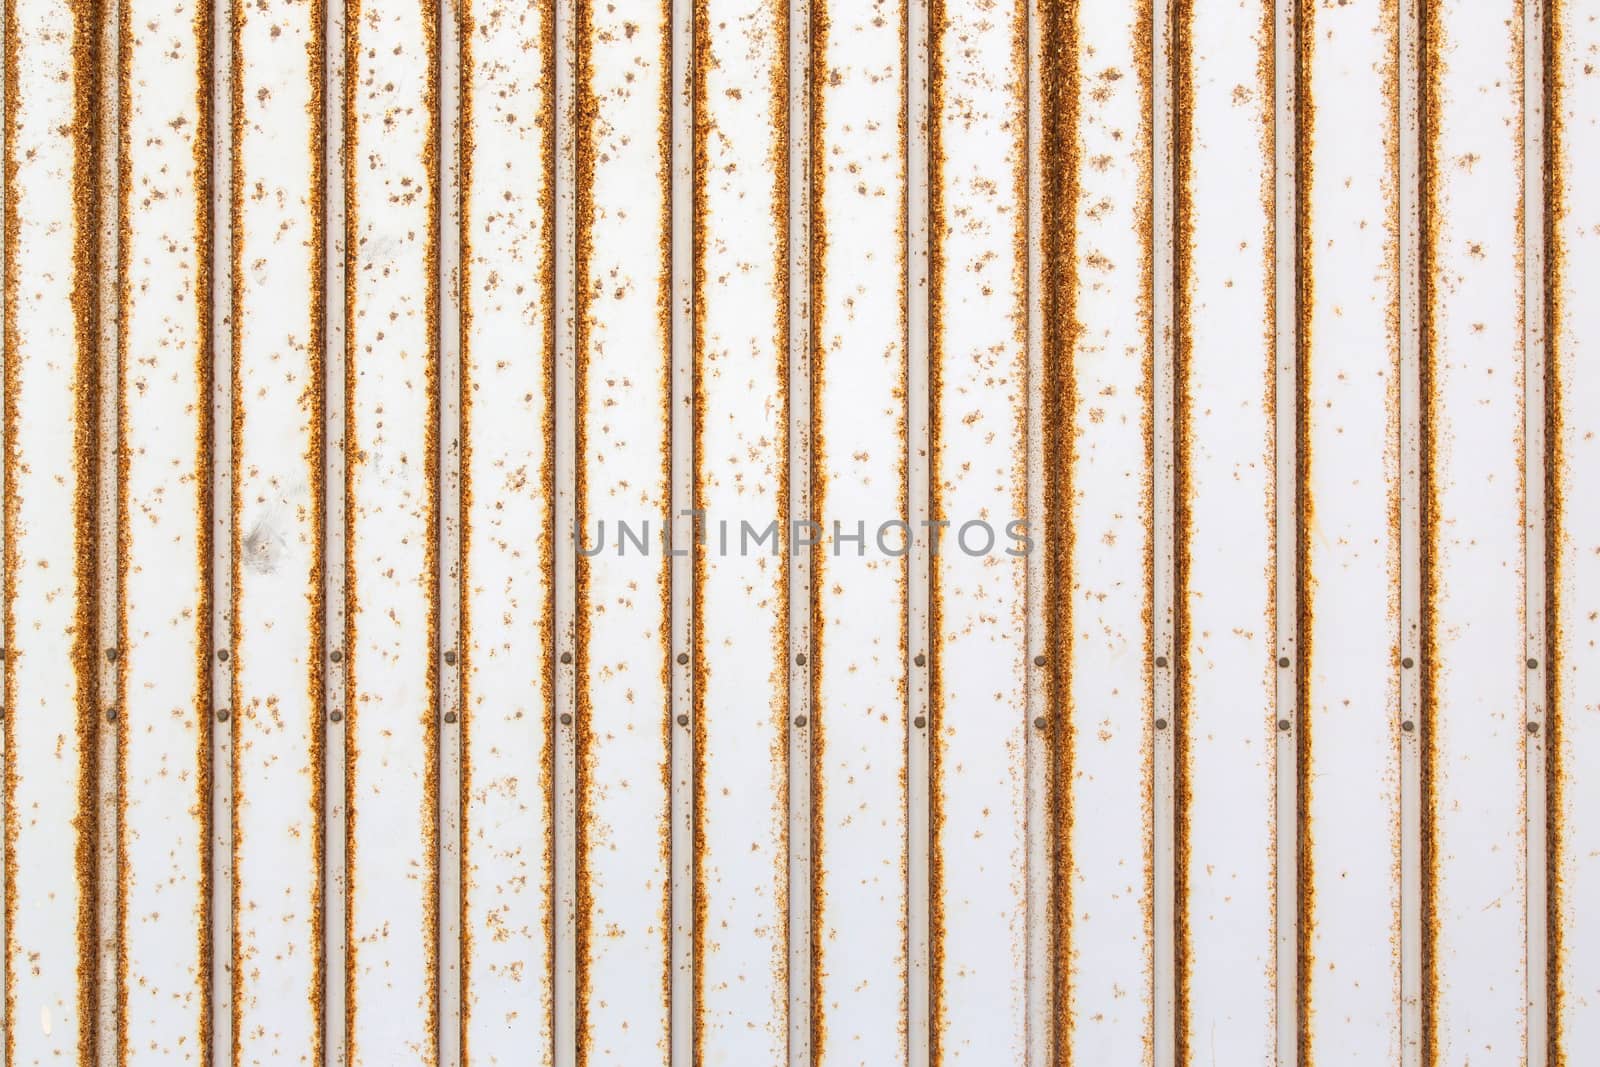 A rusty texture with stripes, suitable as a background